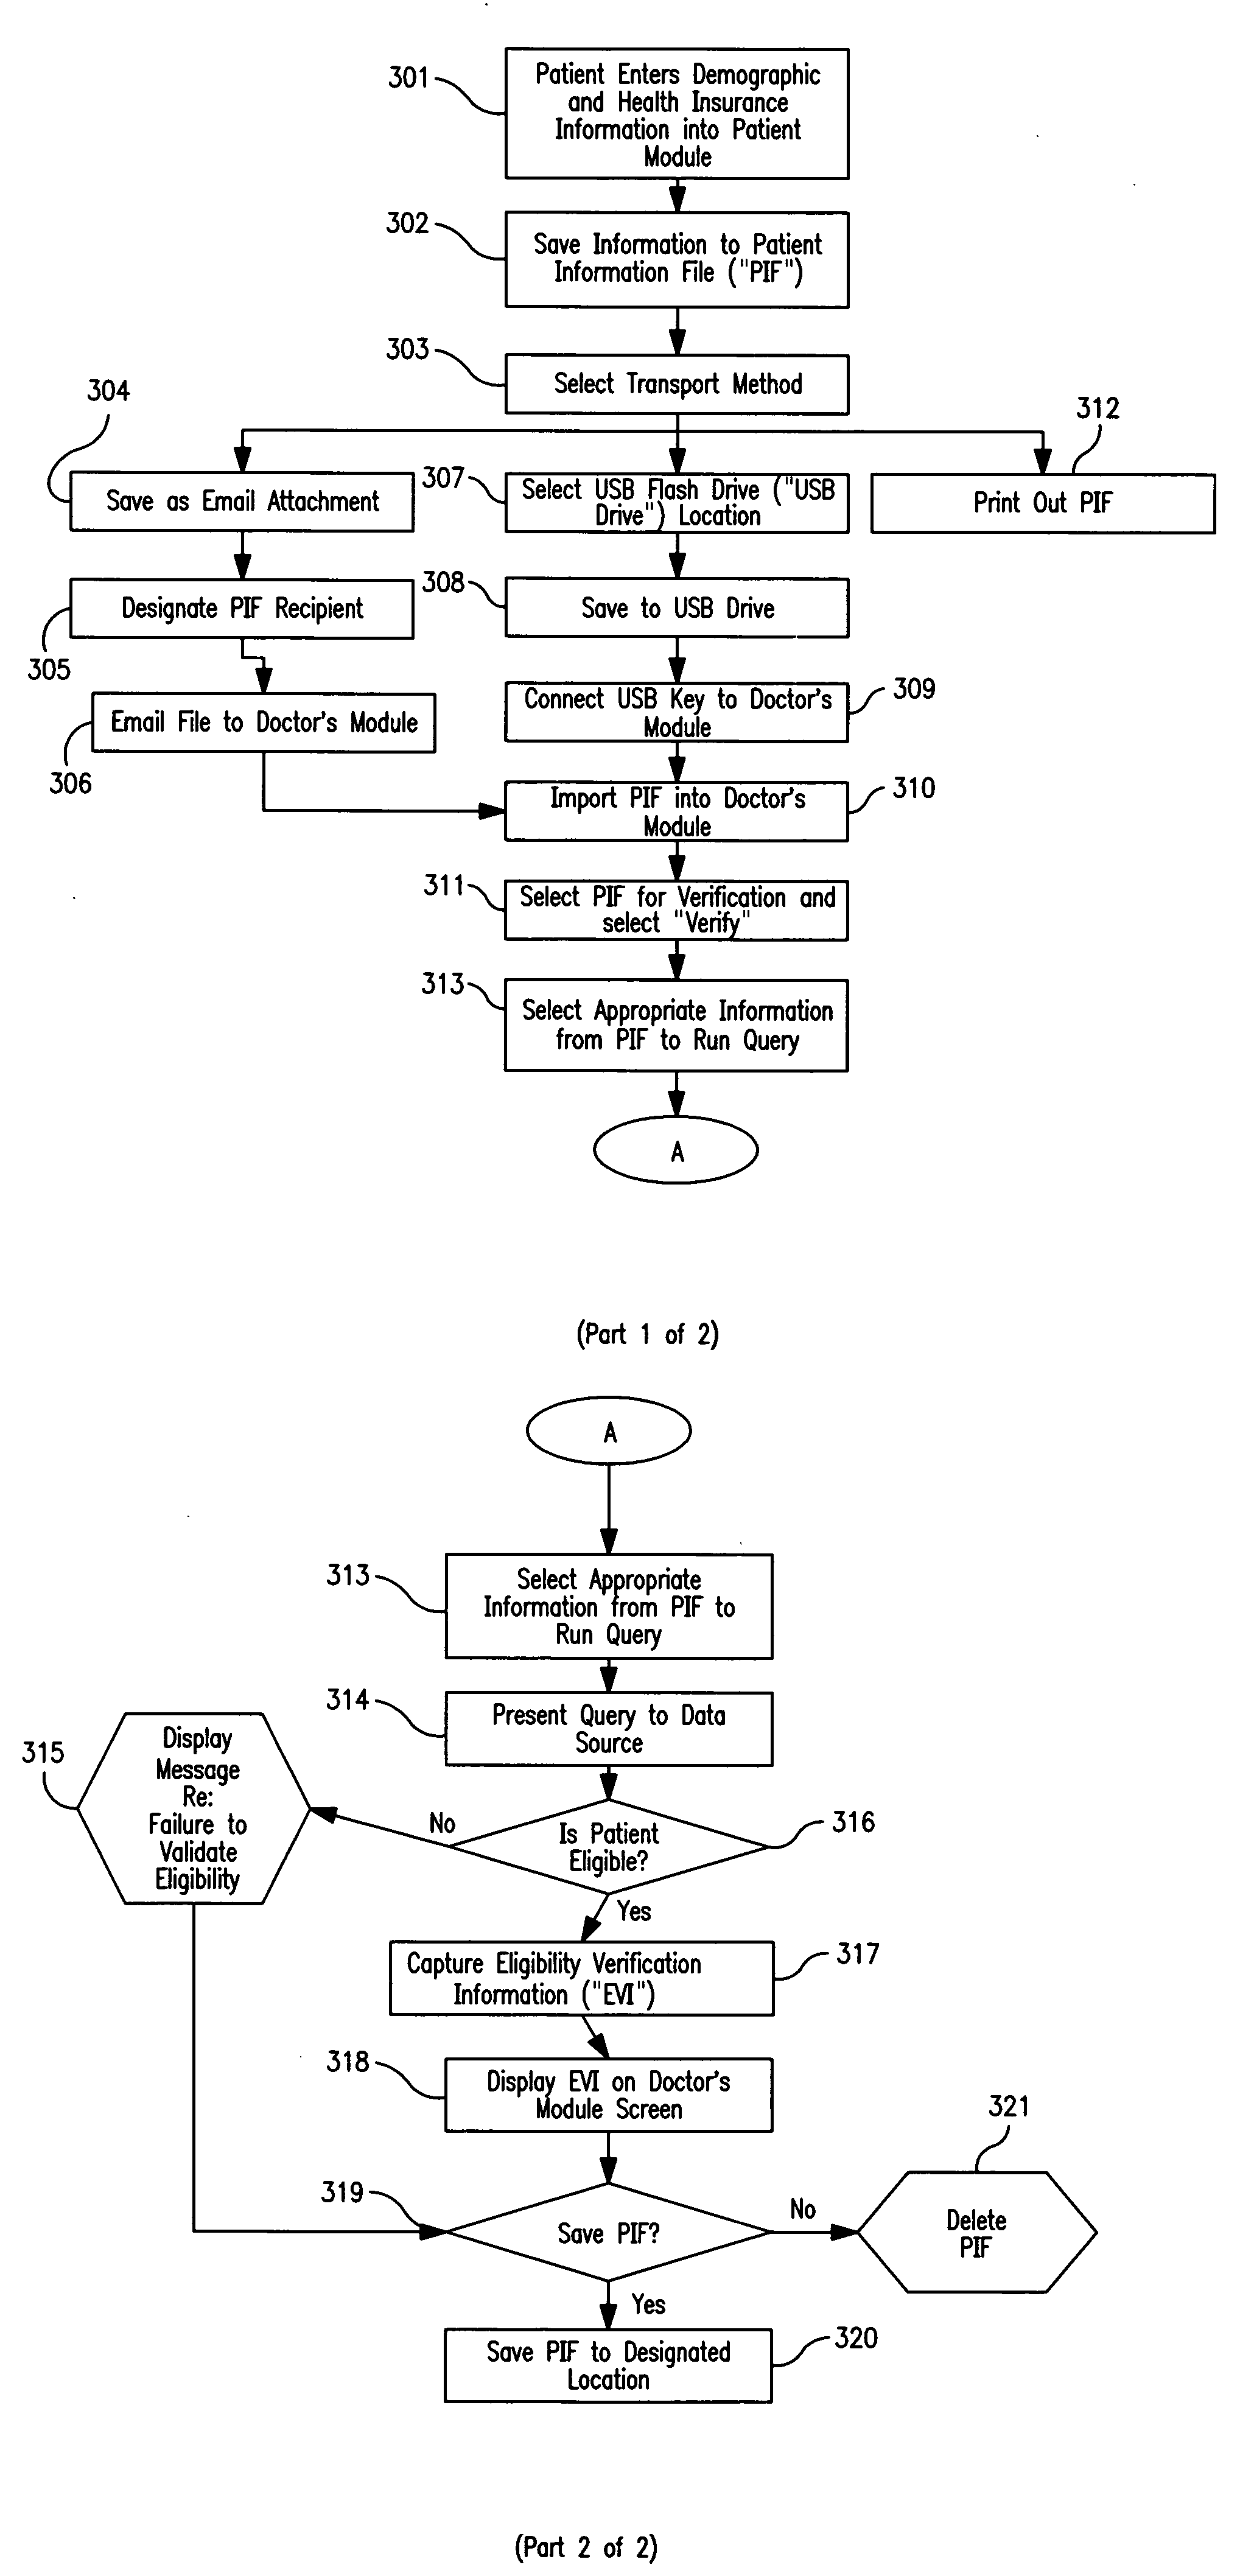 Apparatus and methods for collecting, sharing, managing and analyzing data